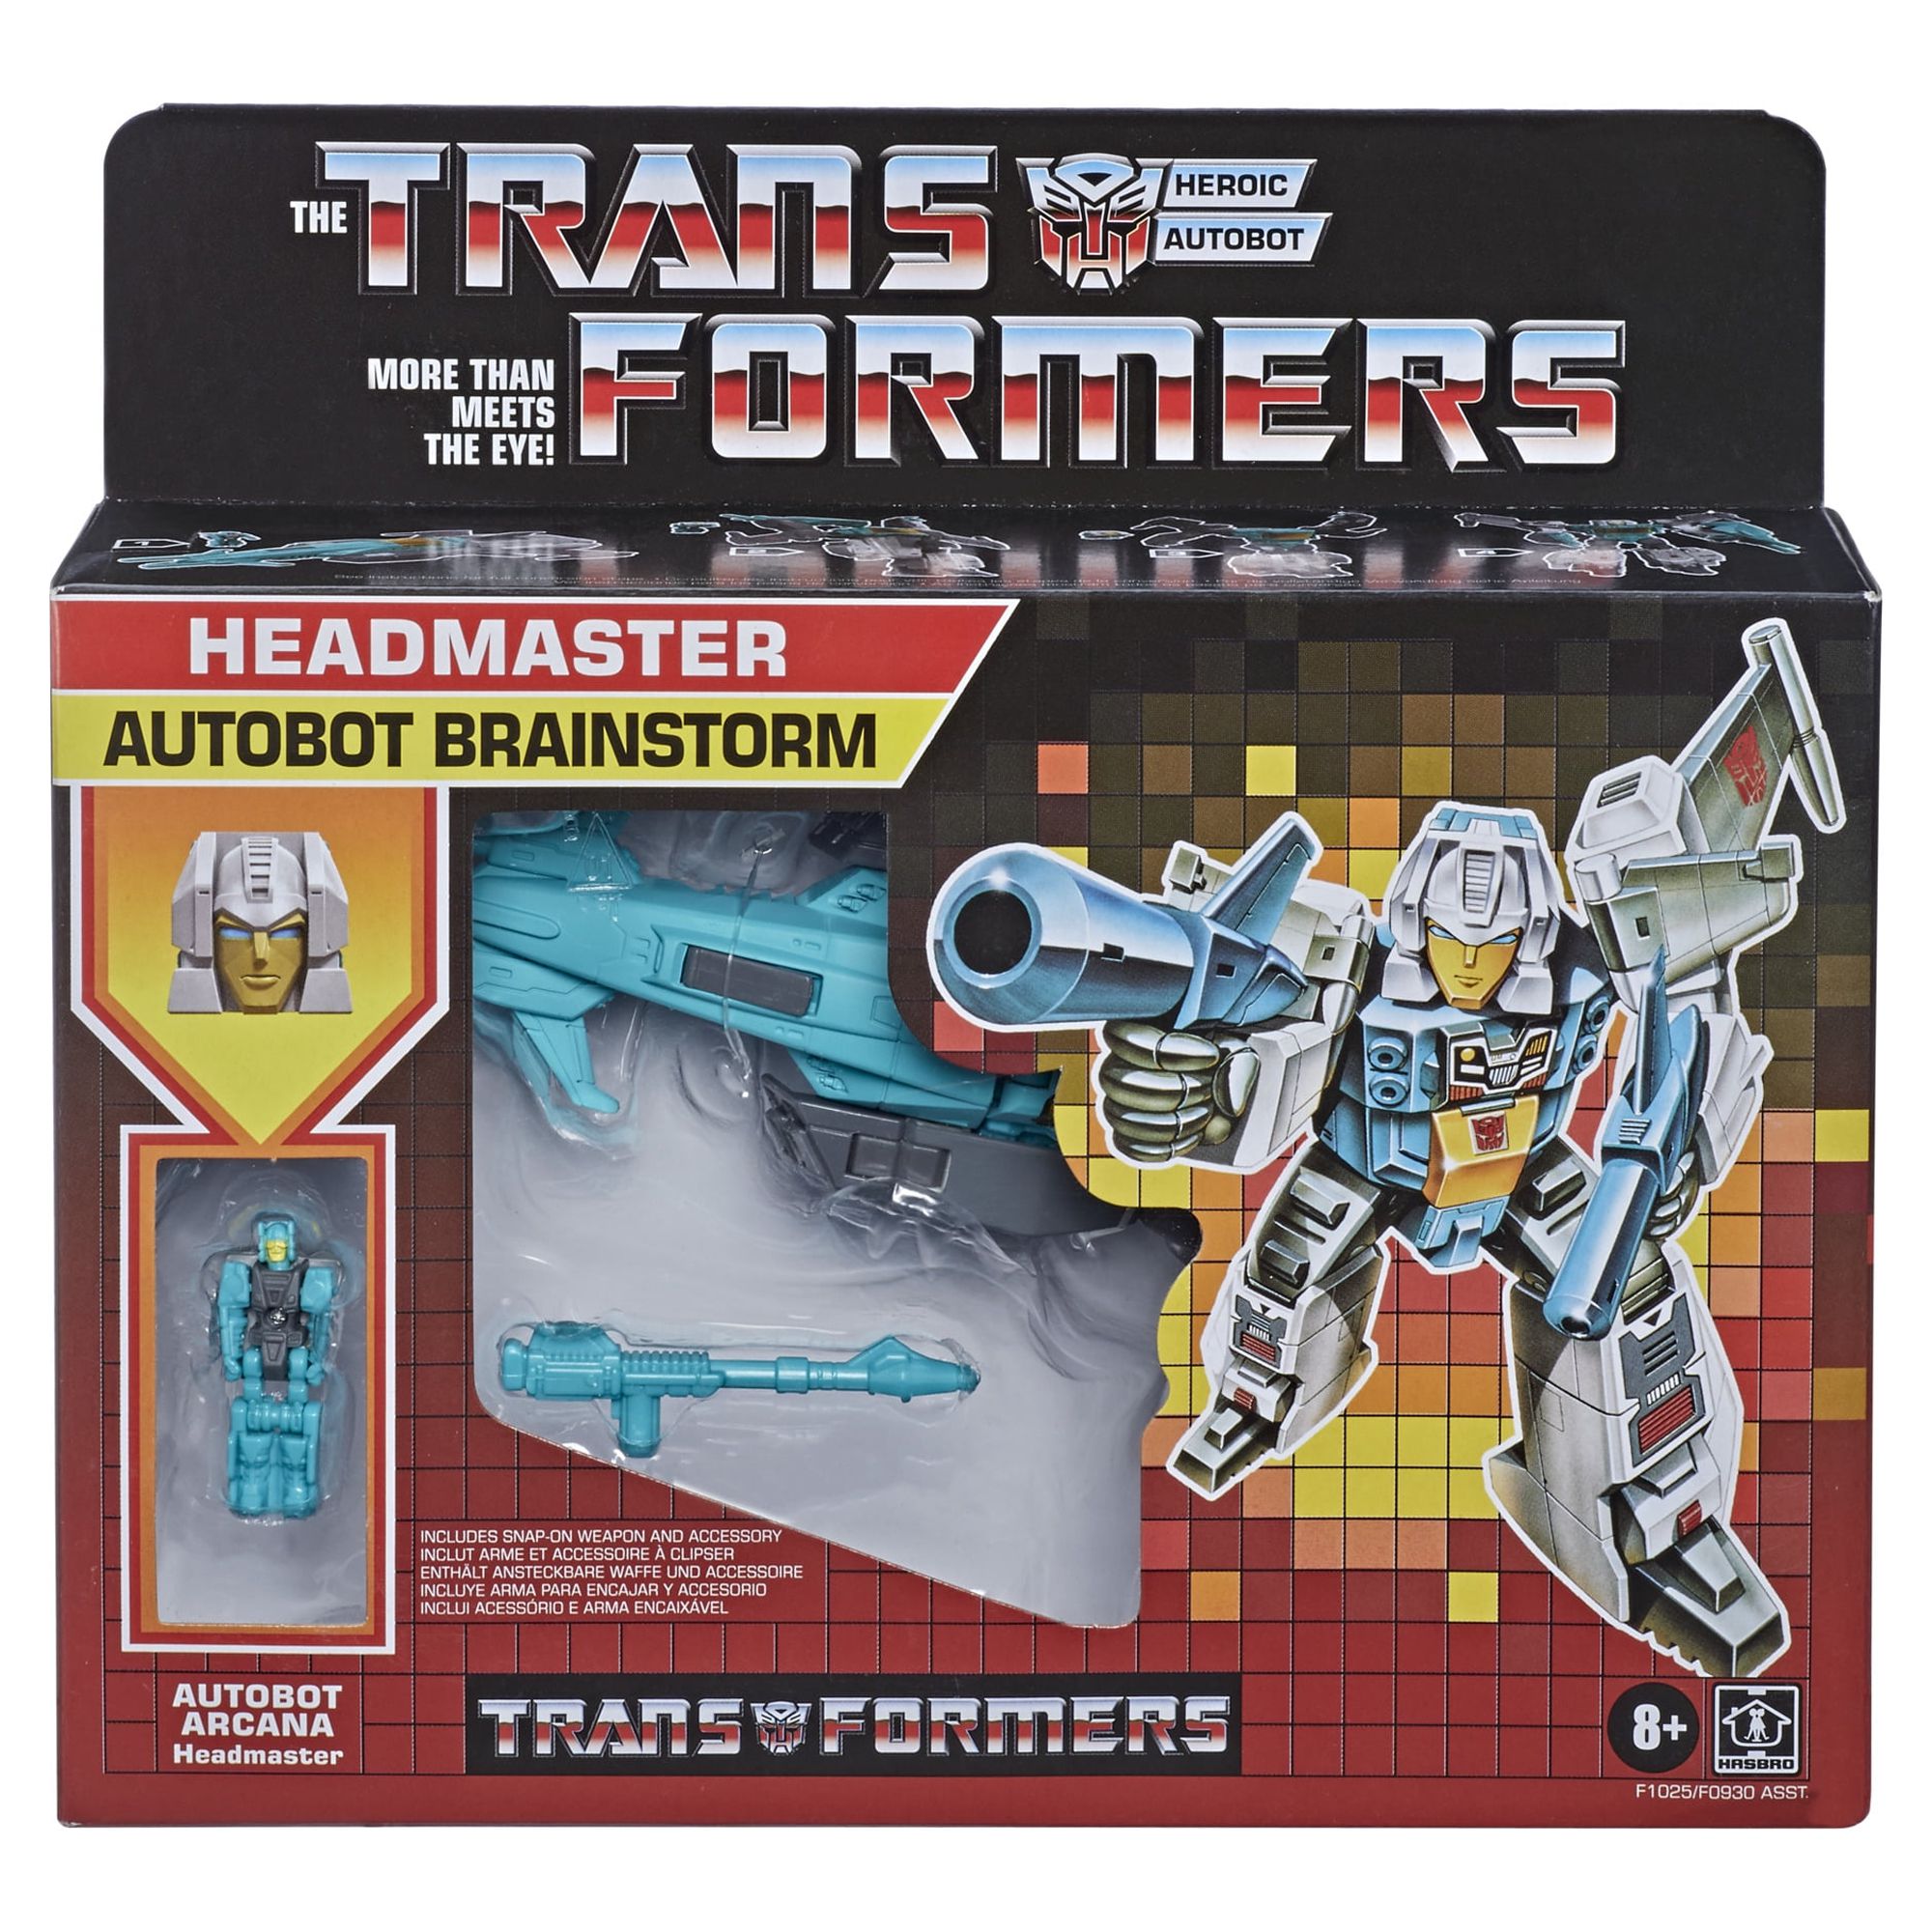 Transformers: Headmaster Autobot Brainstorm Kids Toy Action Figure for Boys and Girls (3”) - image 2 of 9